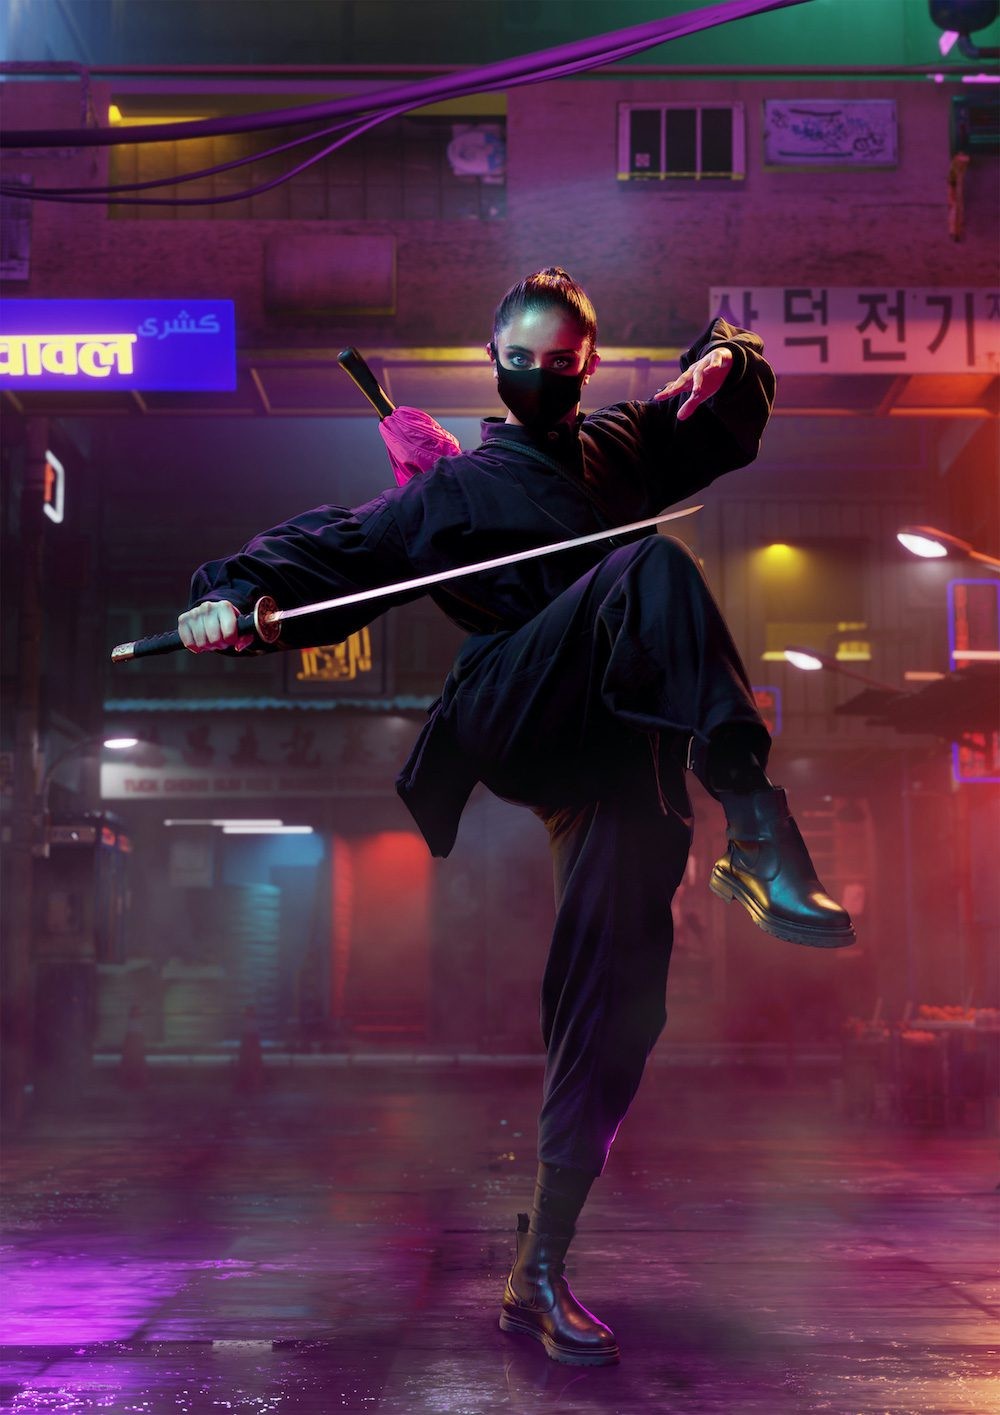 A woman in black wielding a sword stands in a neon-coloured street